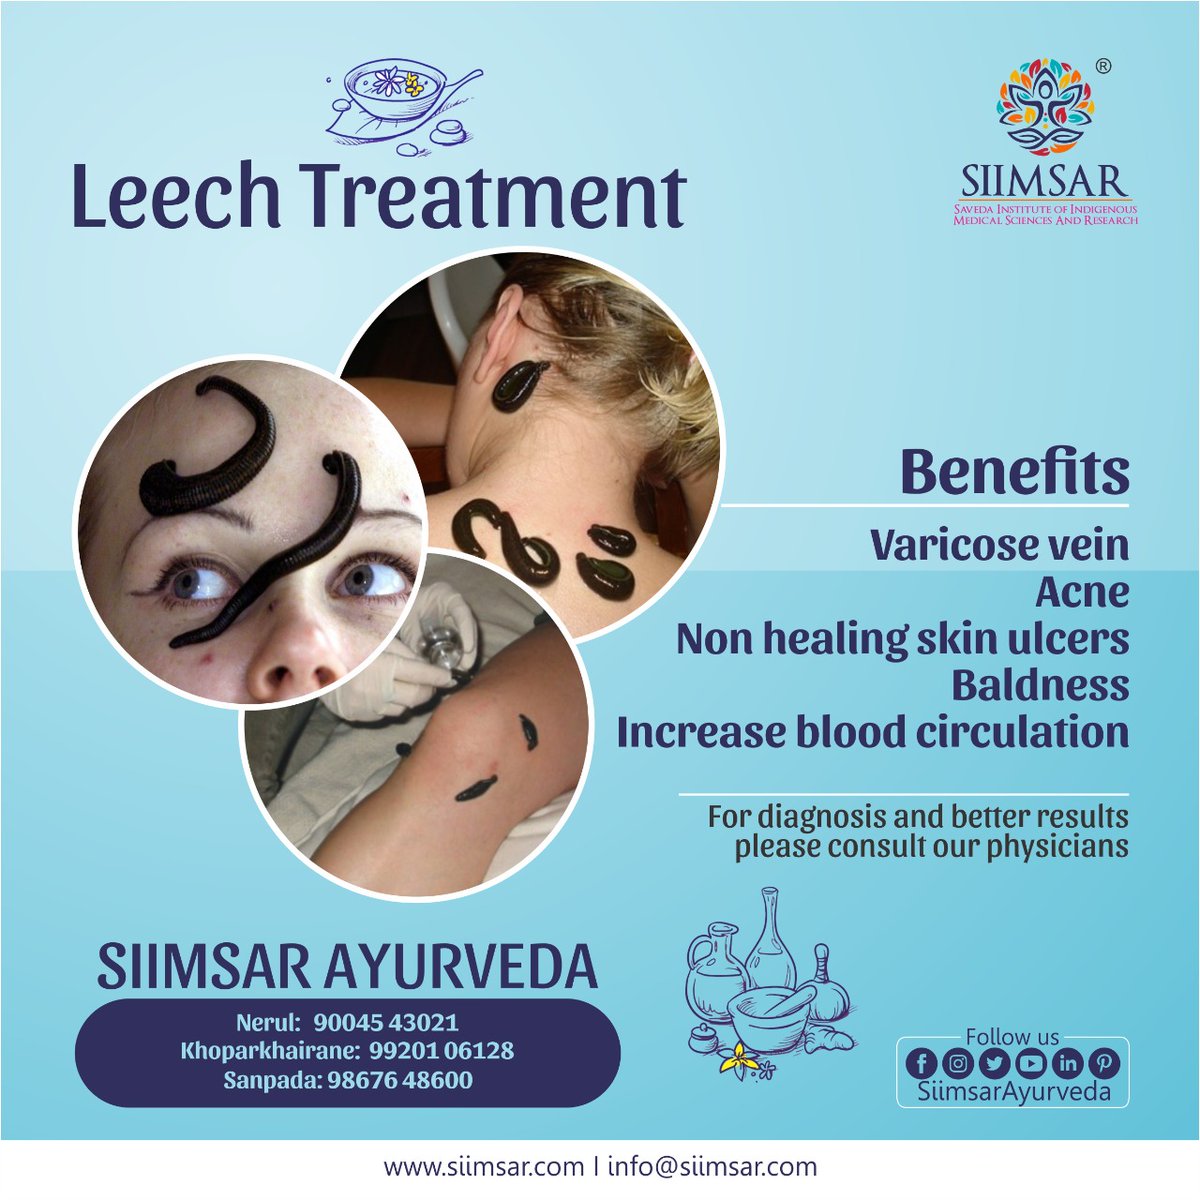 By sticking a leech on soft tissue target of disorder, the saliva it releases makes the patient's blood thinner for smooth circulation. It removes clotted blood. Best for #Varicosevein #Acne #Skinulcers #Baldness. Call us on +91 9326721112 to book an appointment. #leechtreatment